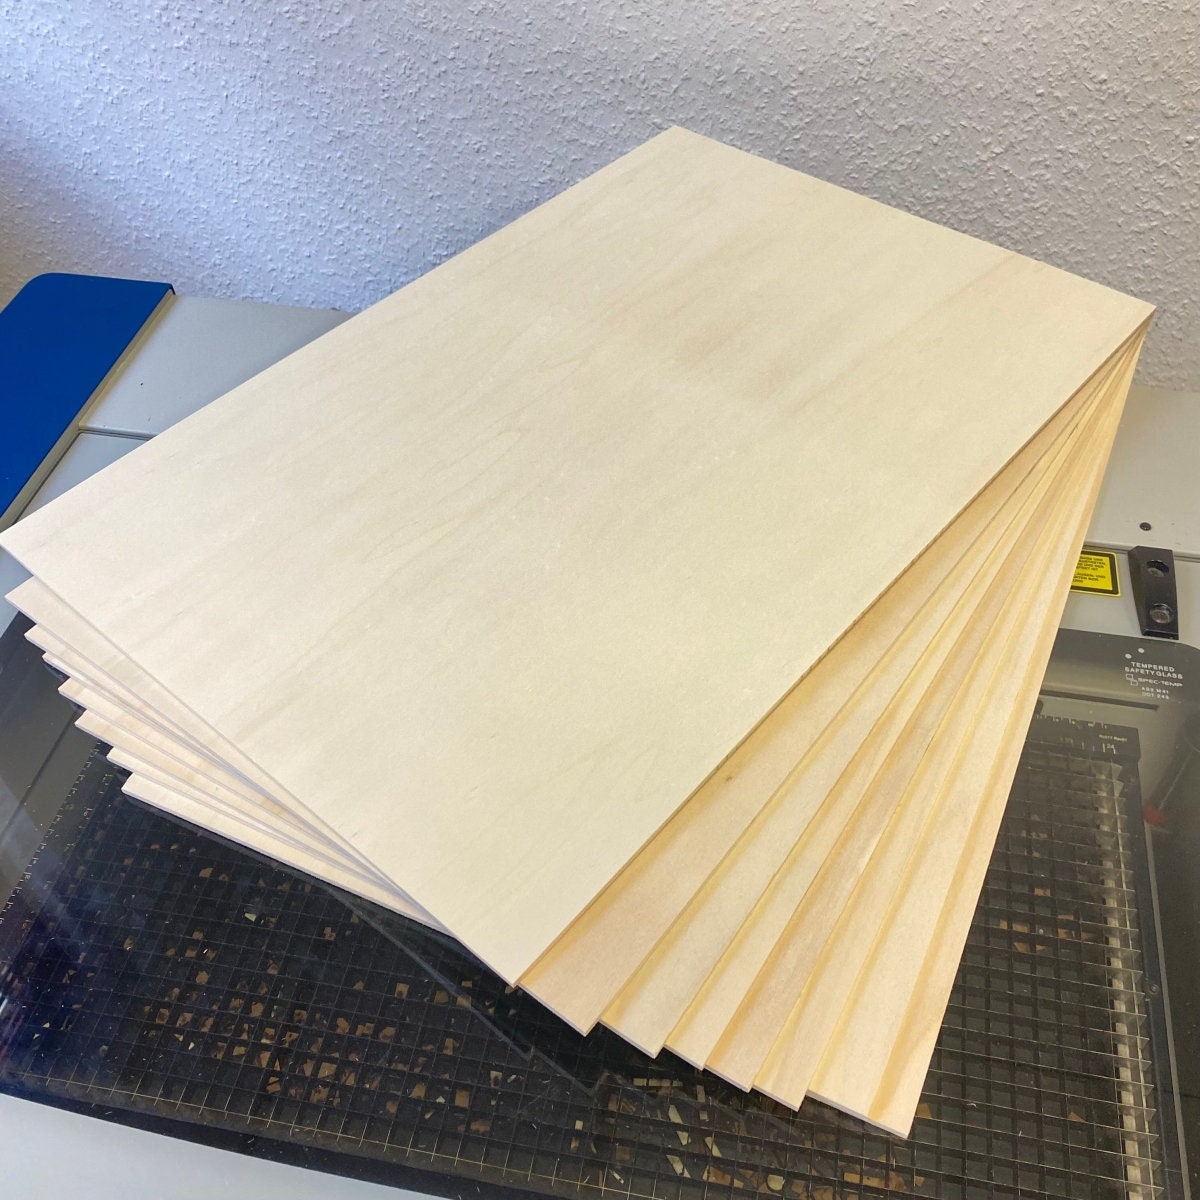 CLEAR ACRYLIC, DOUBLE Sided, Sublimation Blank , Sheet Stock - 1/8 Thick  11.5 x 19 Glowforge Material, Laser Material, Diy, Sublimation